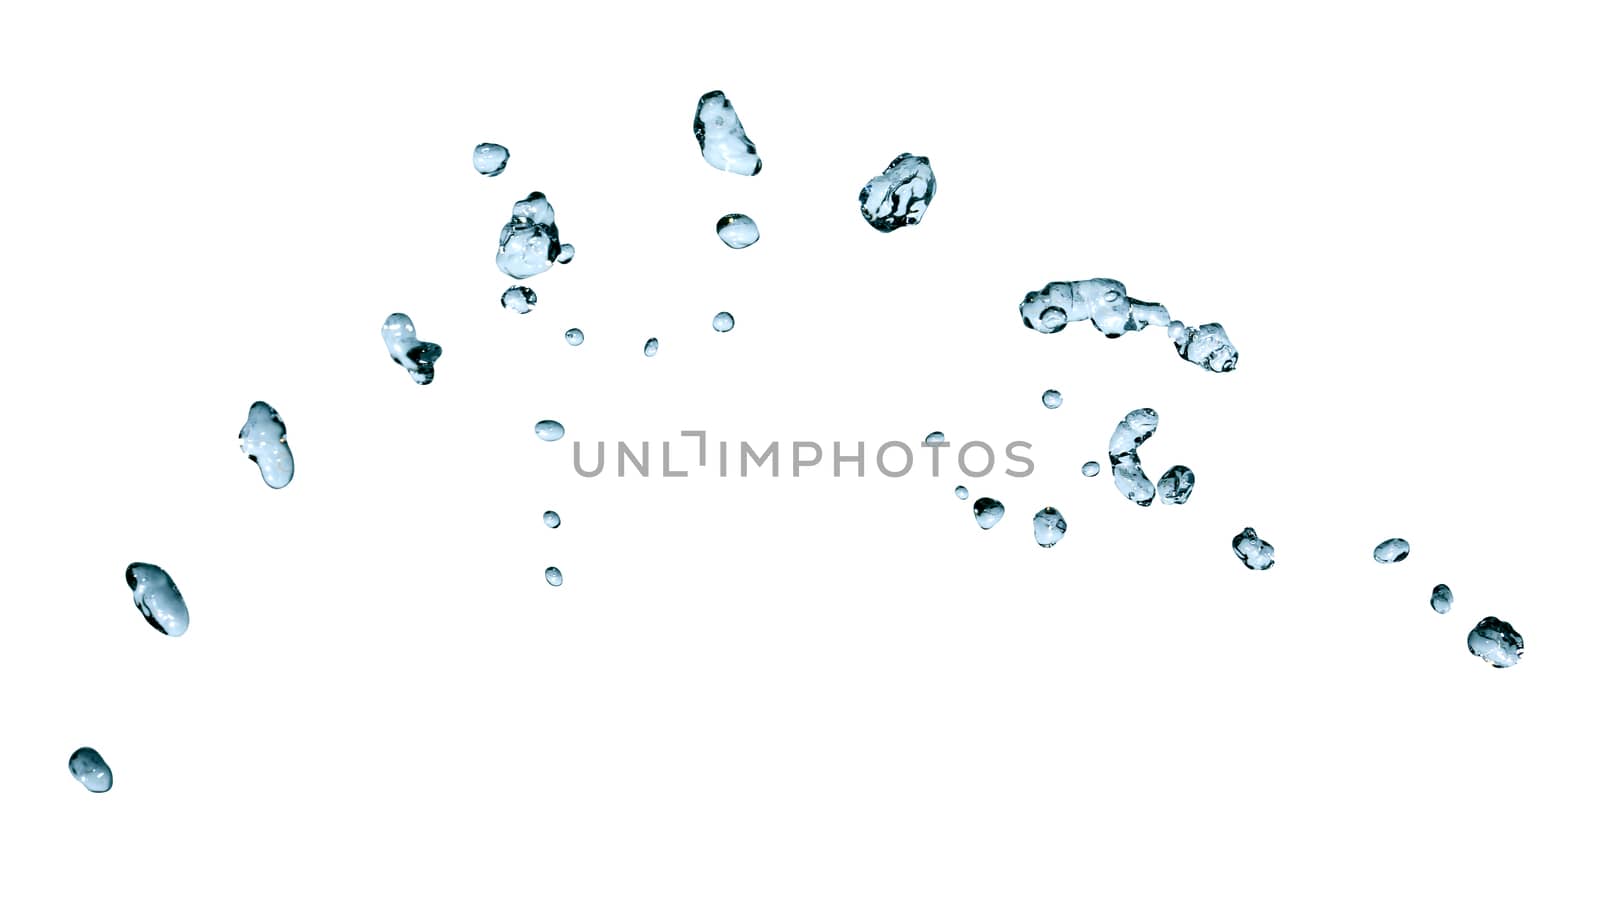 Lot of nice blue water drops against white background